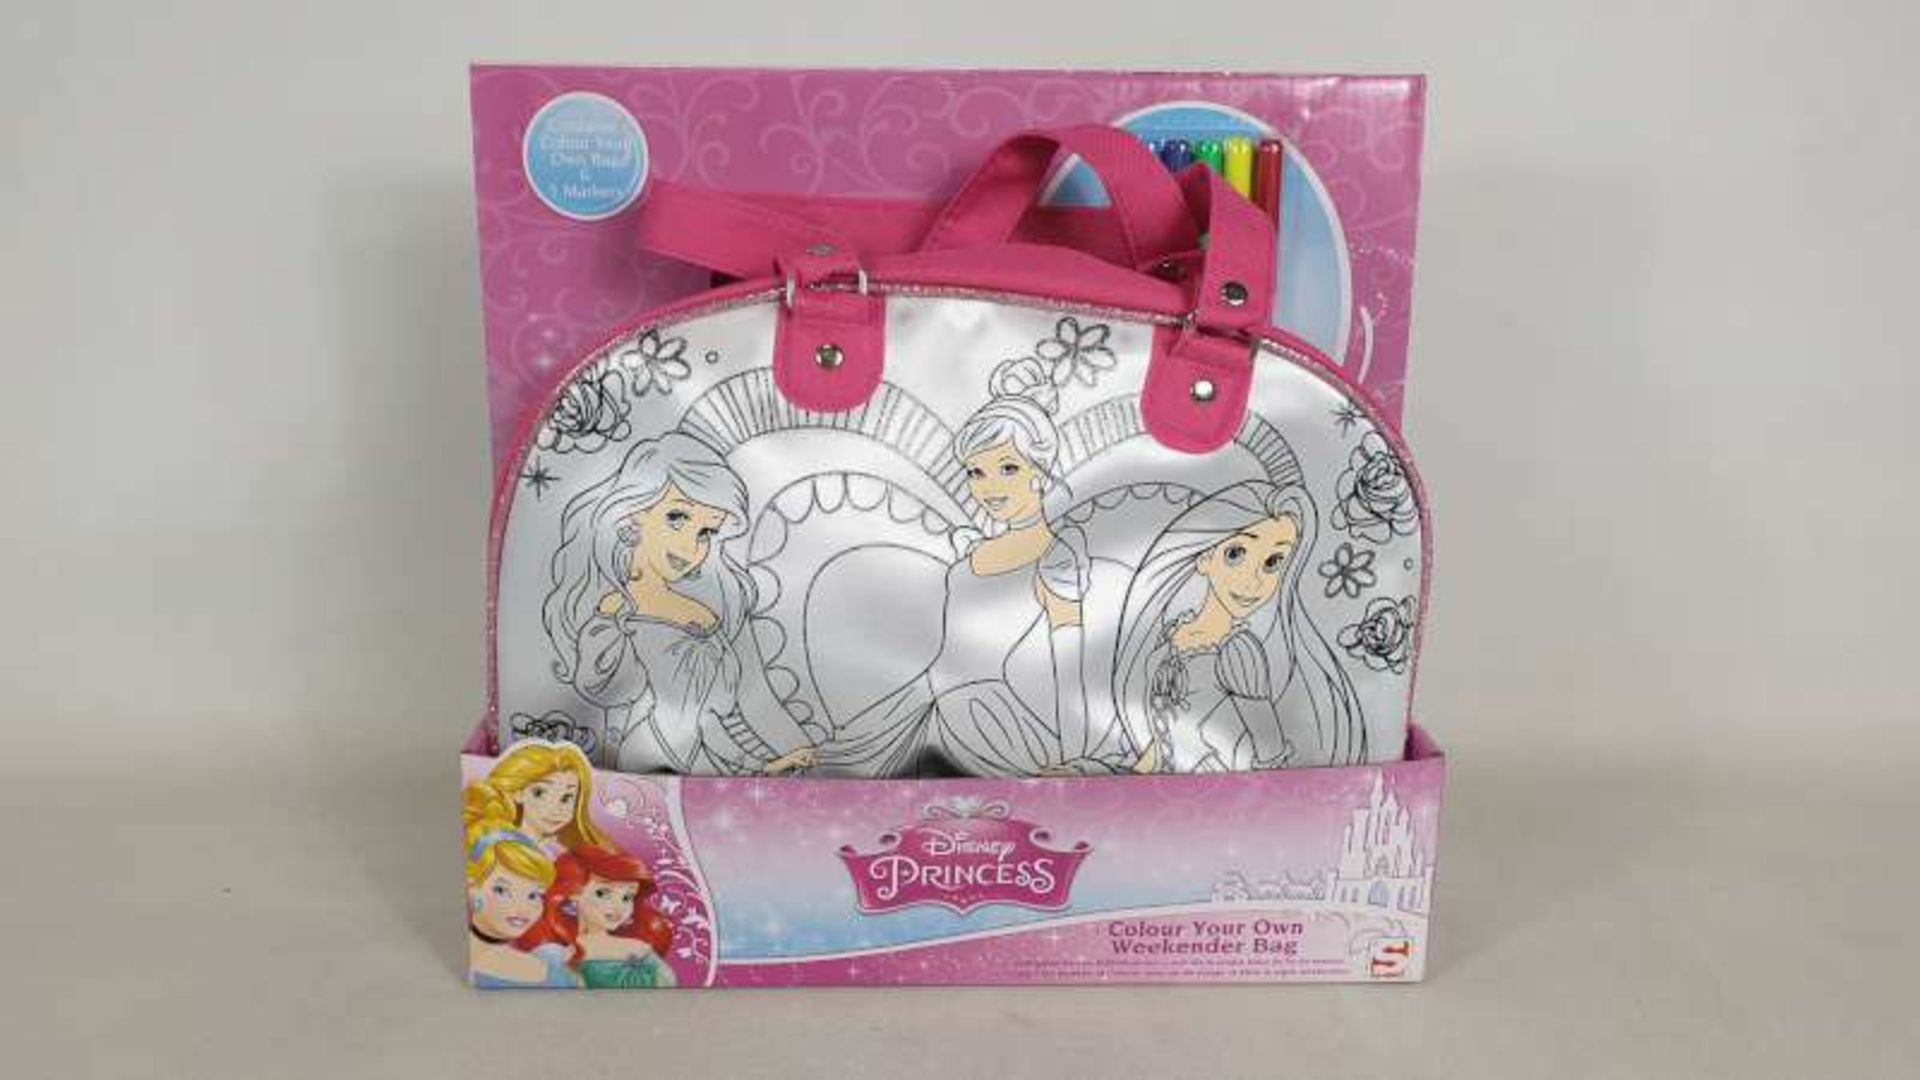 24 X BRAND NEW BOXED DISNEY PRINCESS COLOUR YOUR OWN WEEKENDER BAGS IN 4 BOXES